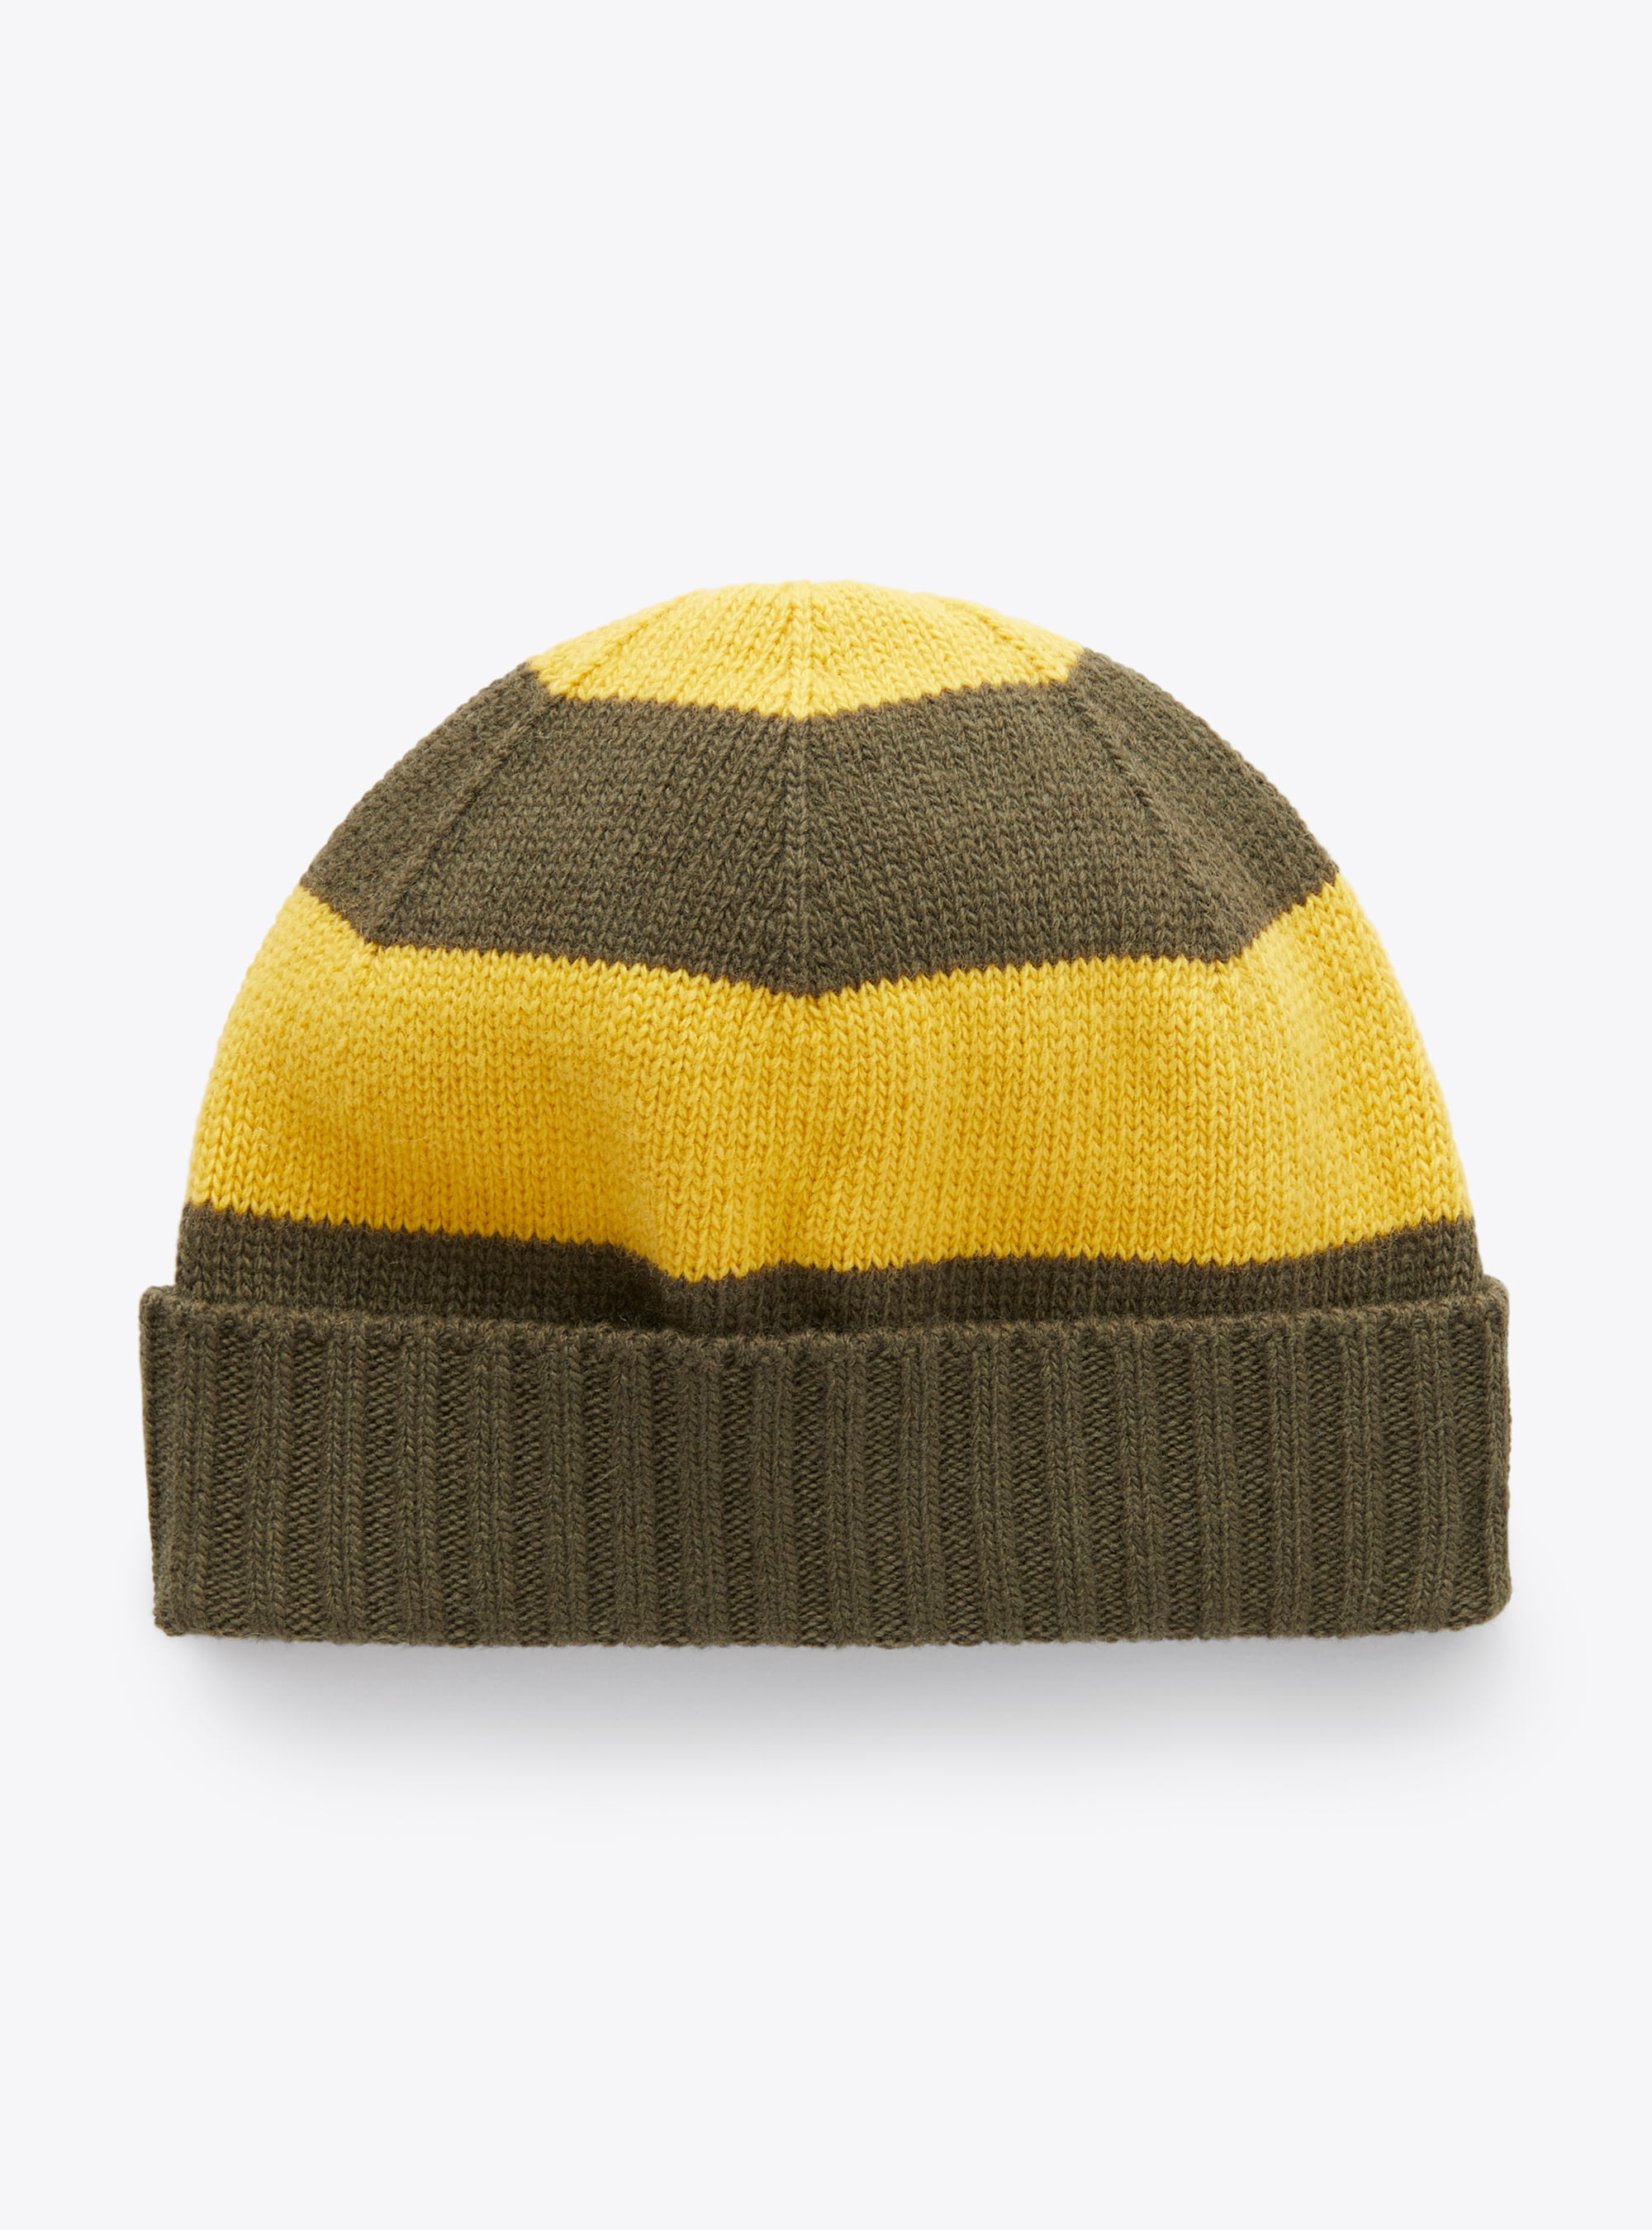 Tricot-knit hat in green and yellow stripes - Green | Il Gufo